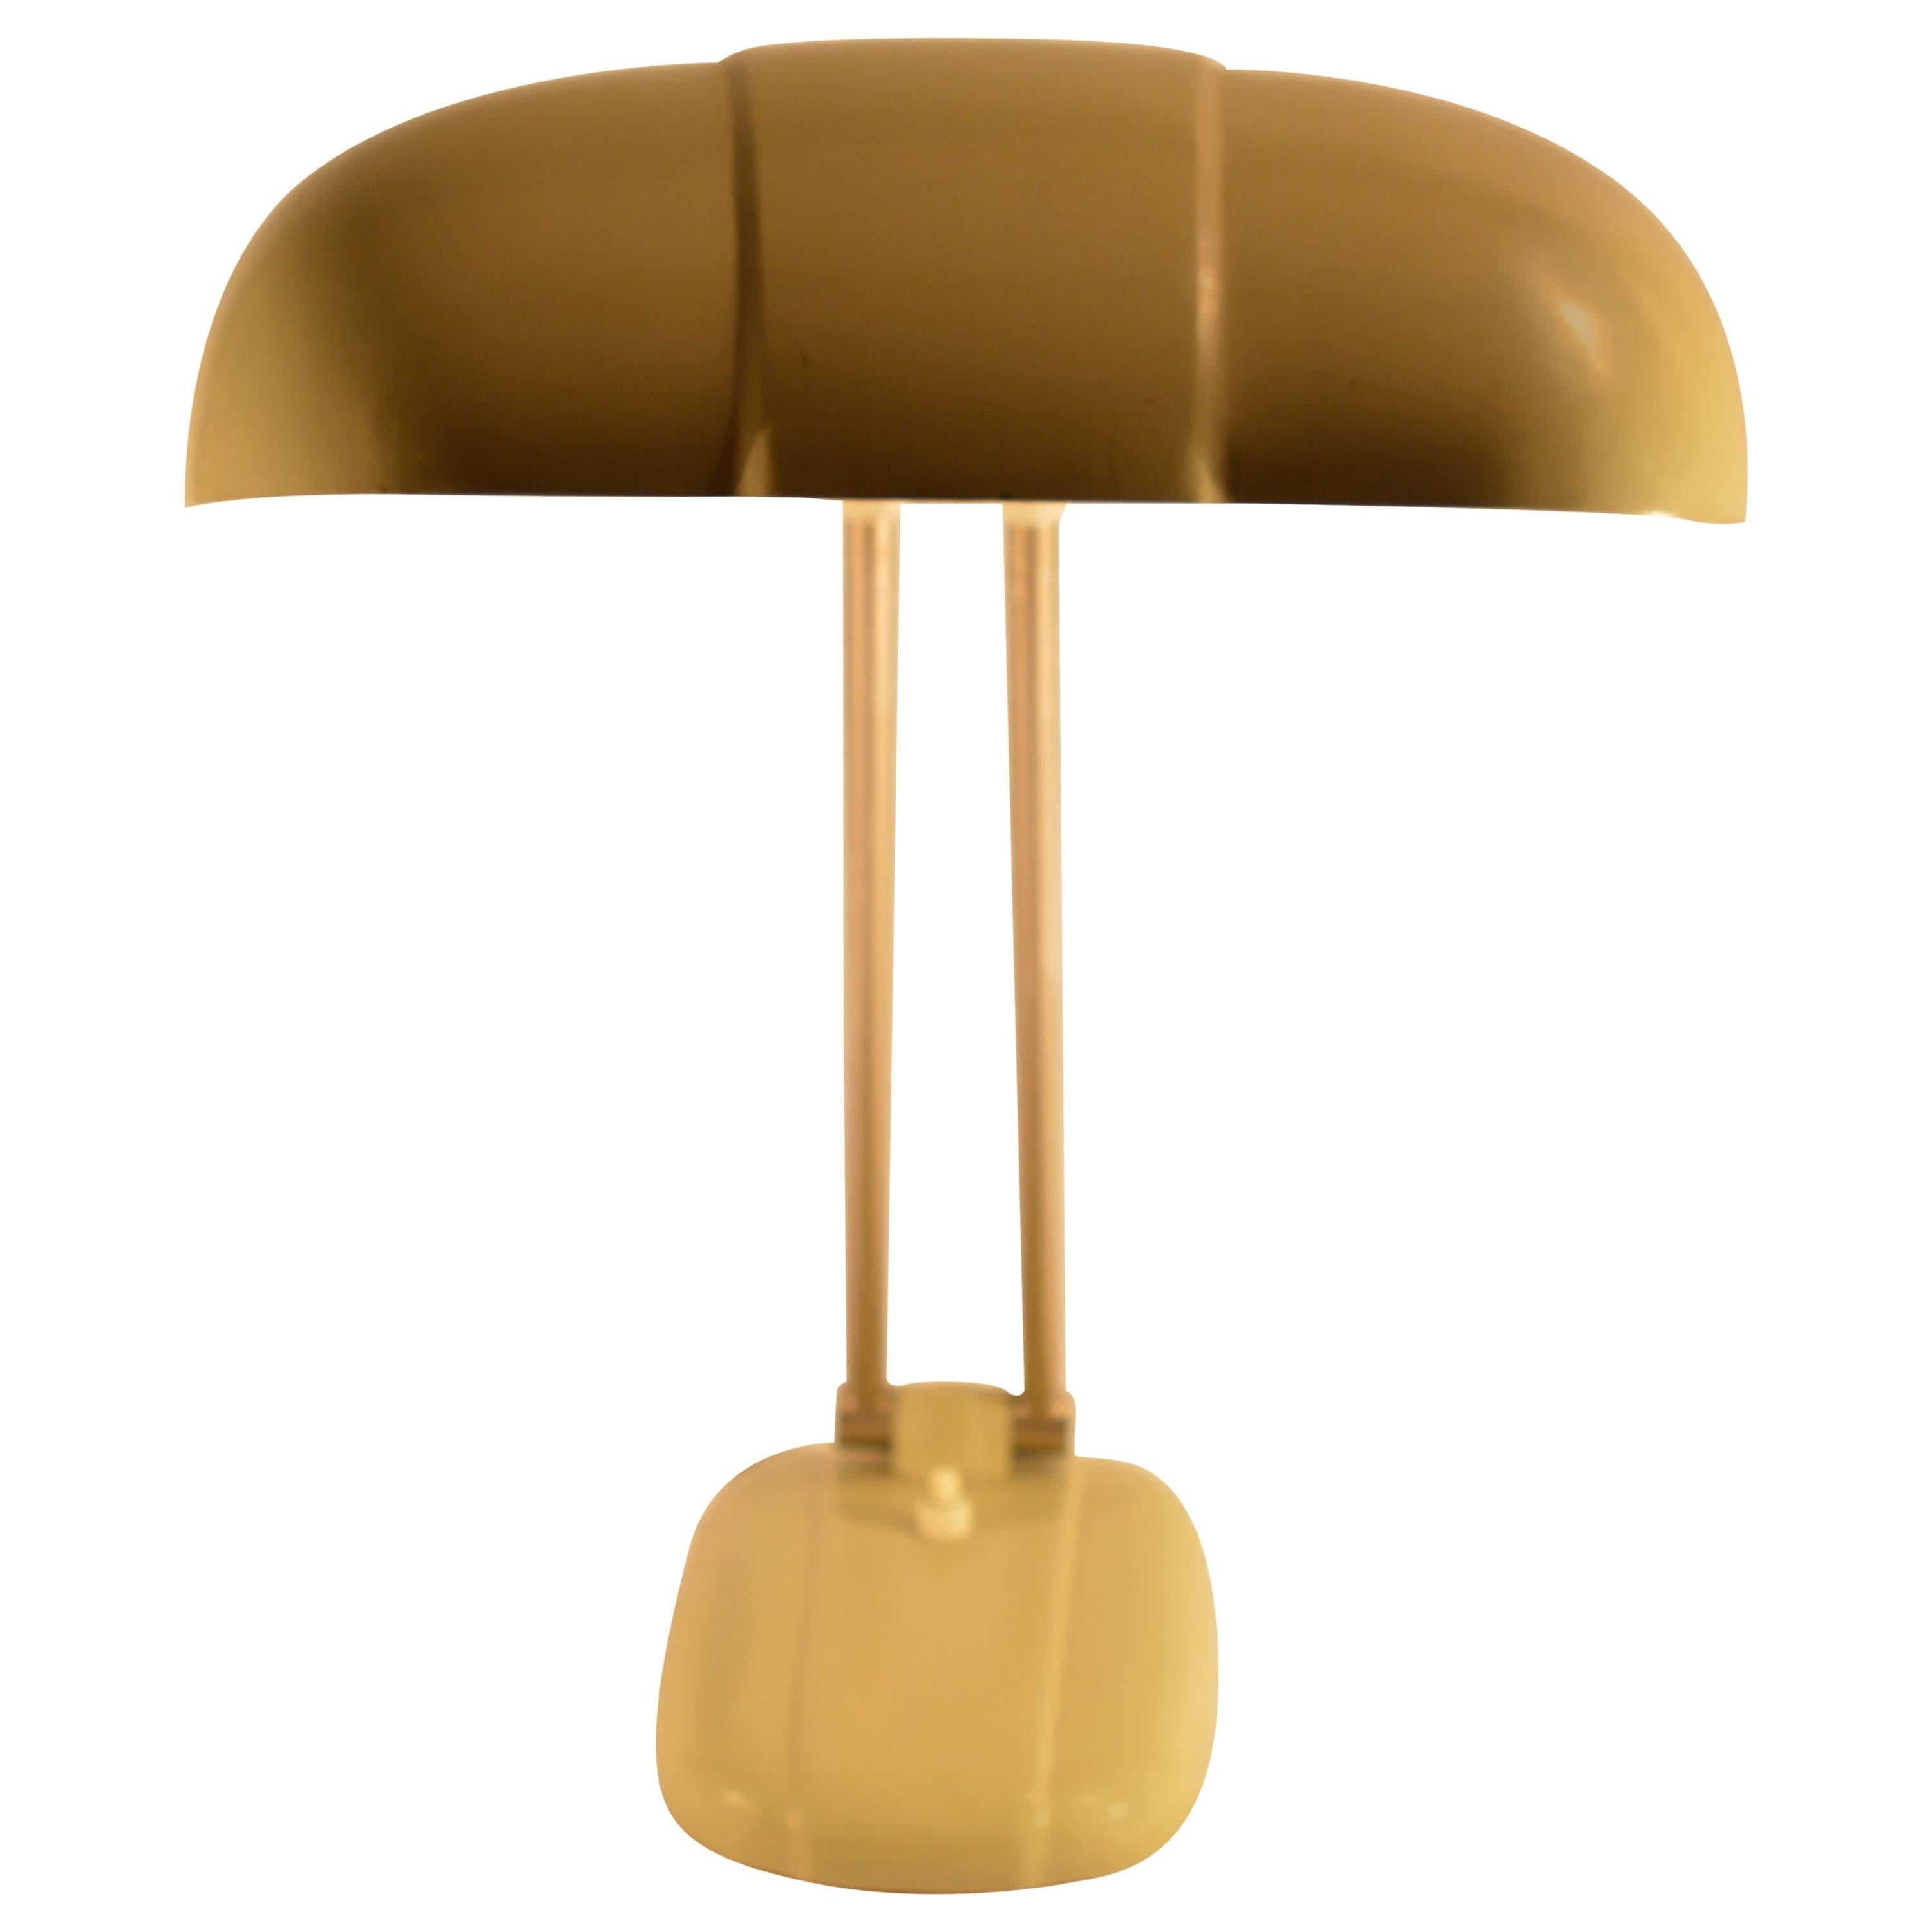 Swiss Table Lamp by Siegfried Giedion for BAG Turgi, 1930s